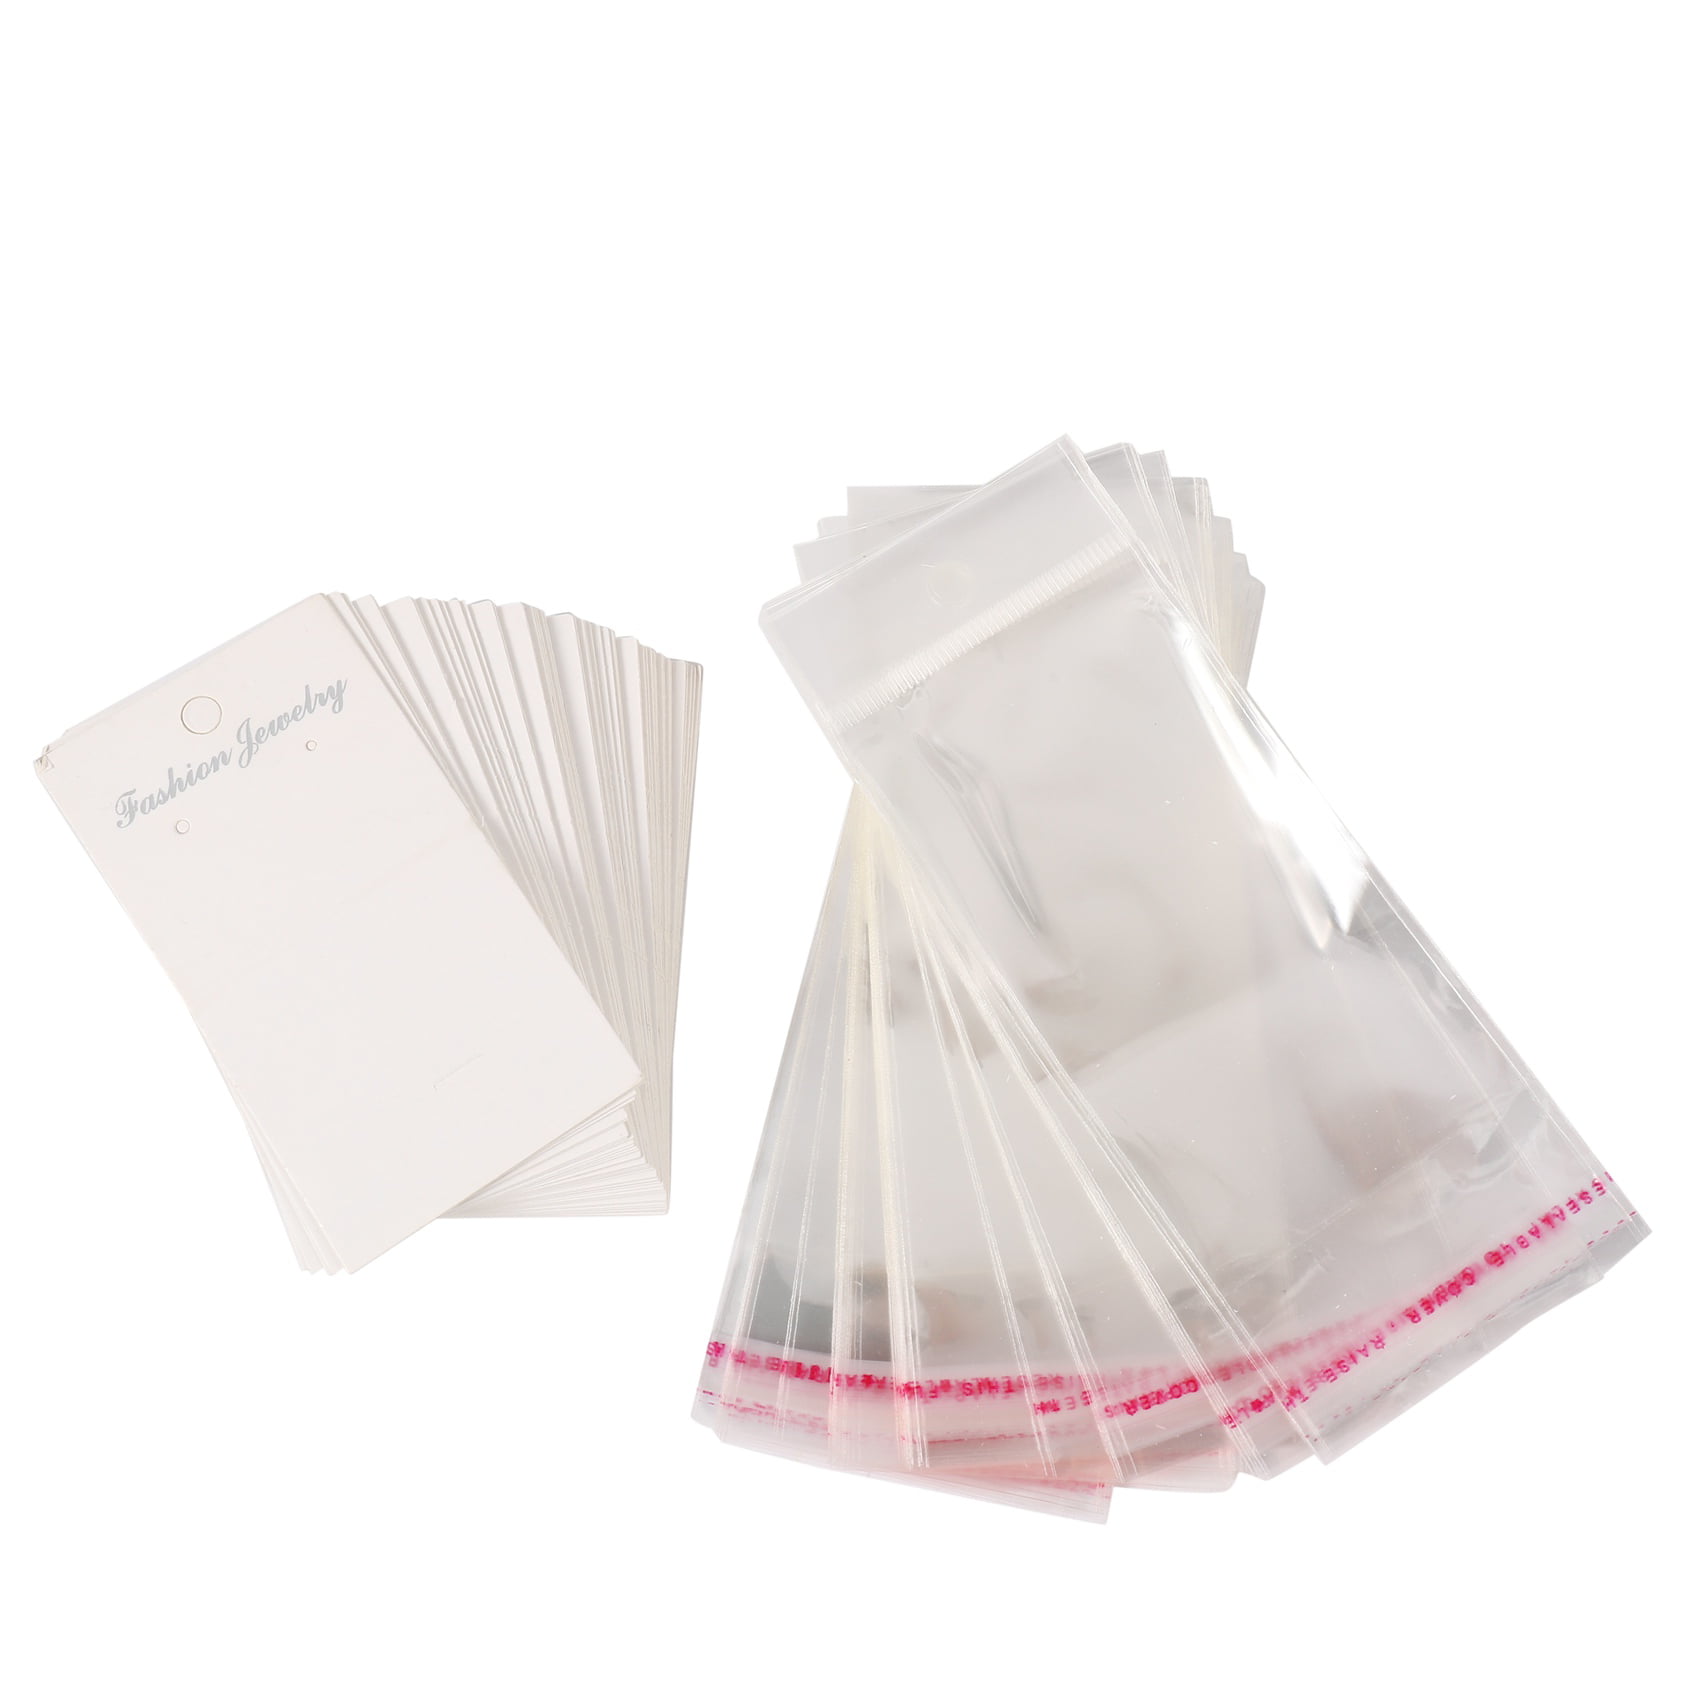 Jewellery 100 x White Plain Earring Display Cards & Self Adhesive Bags A8G7 